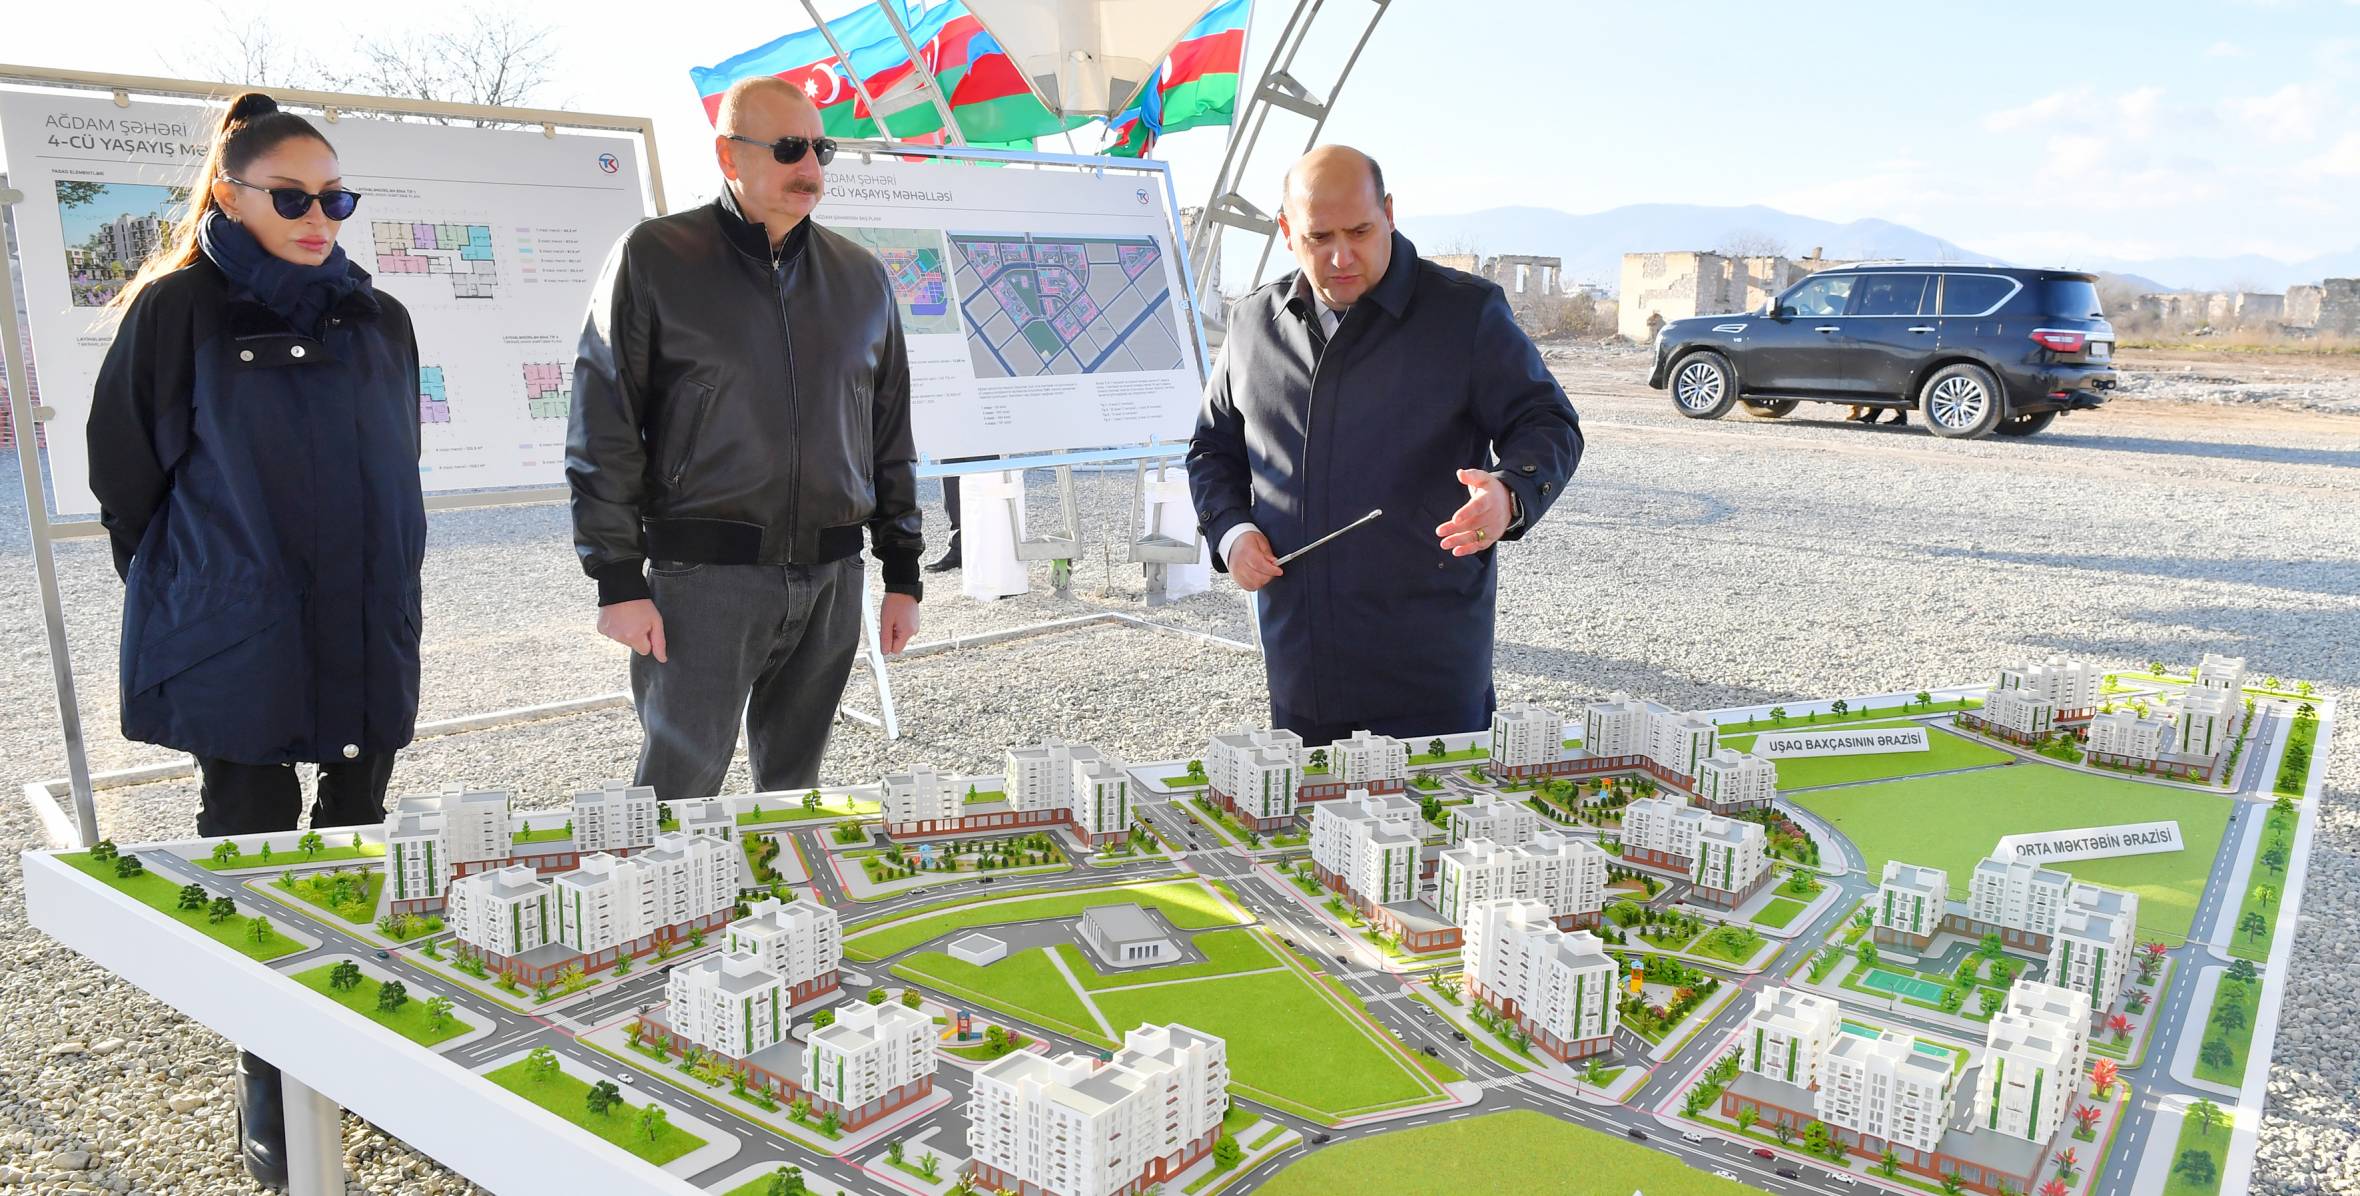 Ilham Aliyev and First Lady Mehriban Aliyeva have participated in a ceremony of the laying of the foundation stone for the 4th residential complex in the city of Aghdam